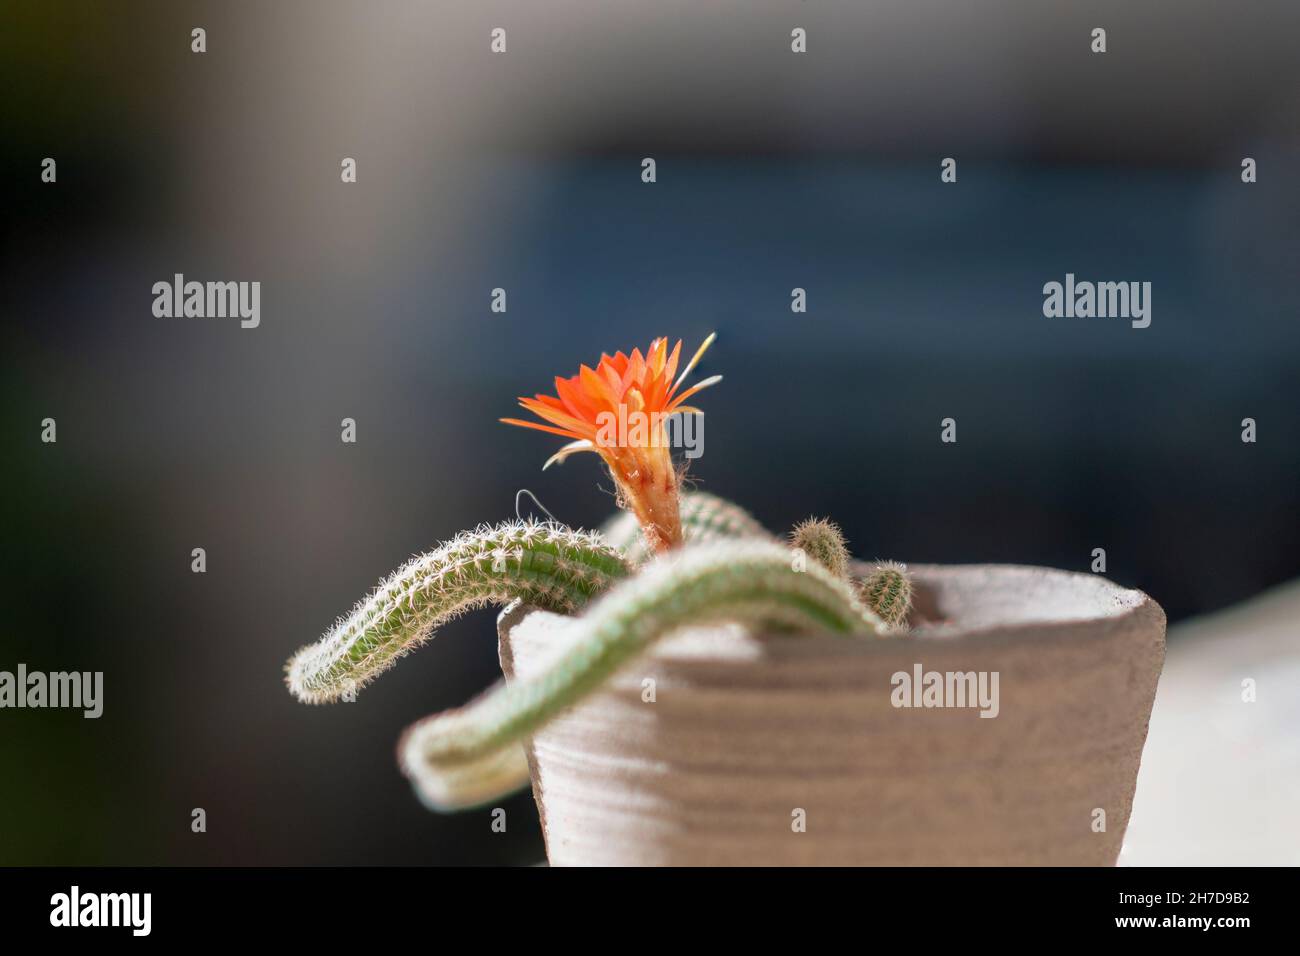 Blooming Peanut Cactus (Echinopsis chamaecereus) with red and orange flower Stock Photo